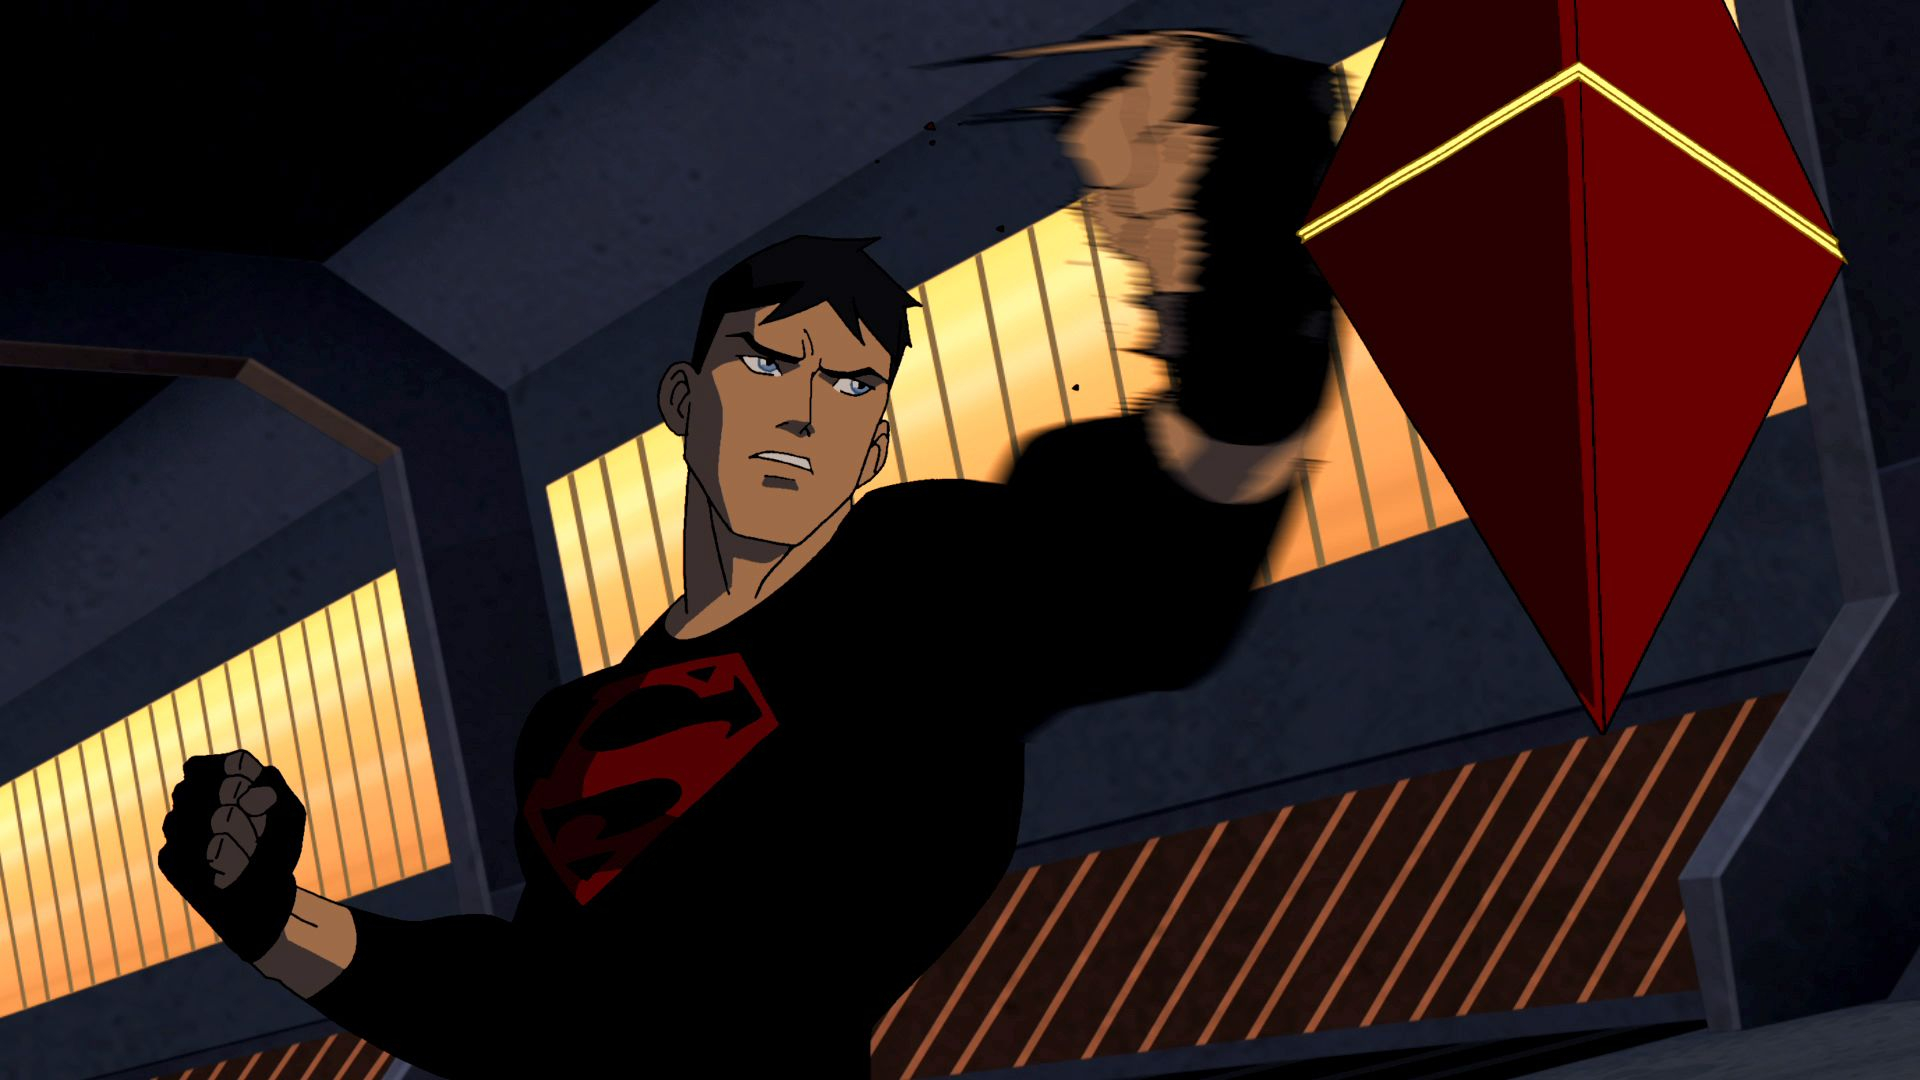 1920x1080 Superboy-S02E15 | Young justice, Young justice superboy, Young justice season 3